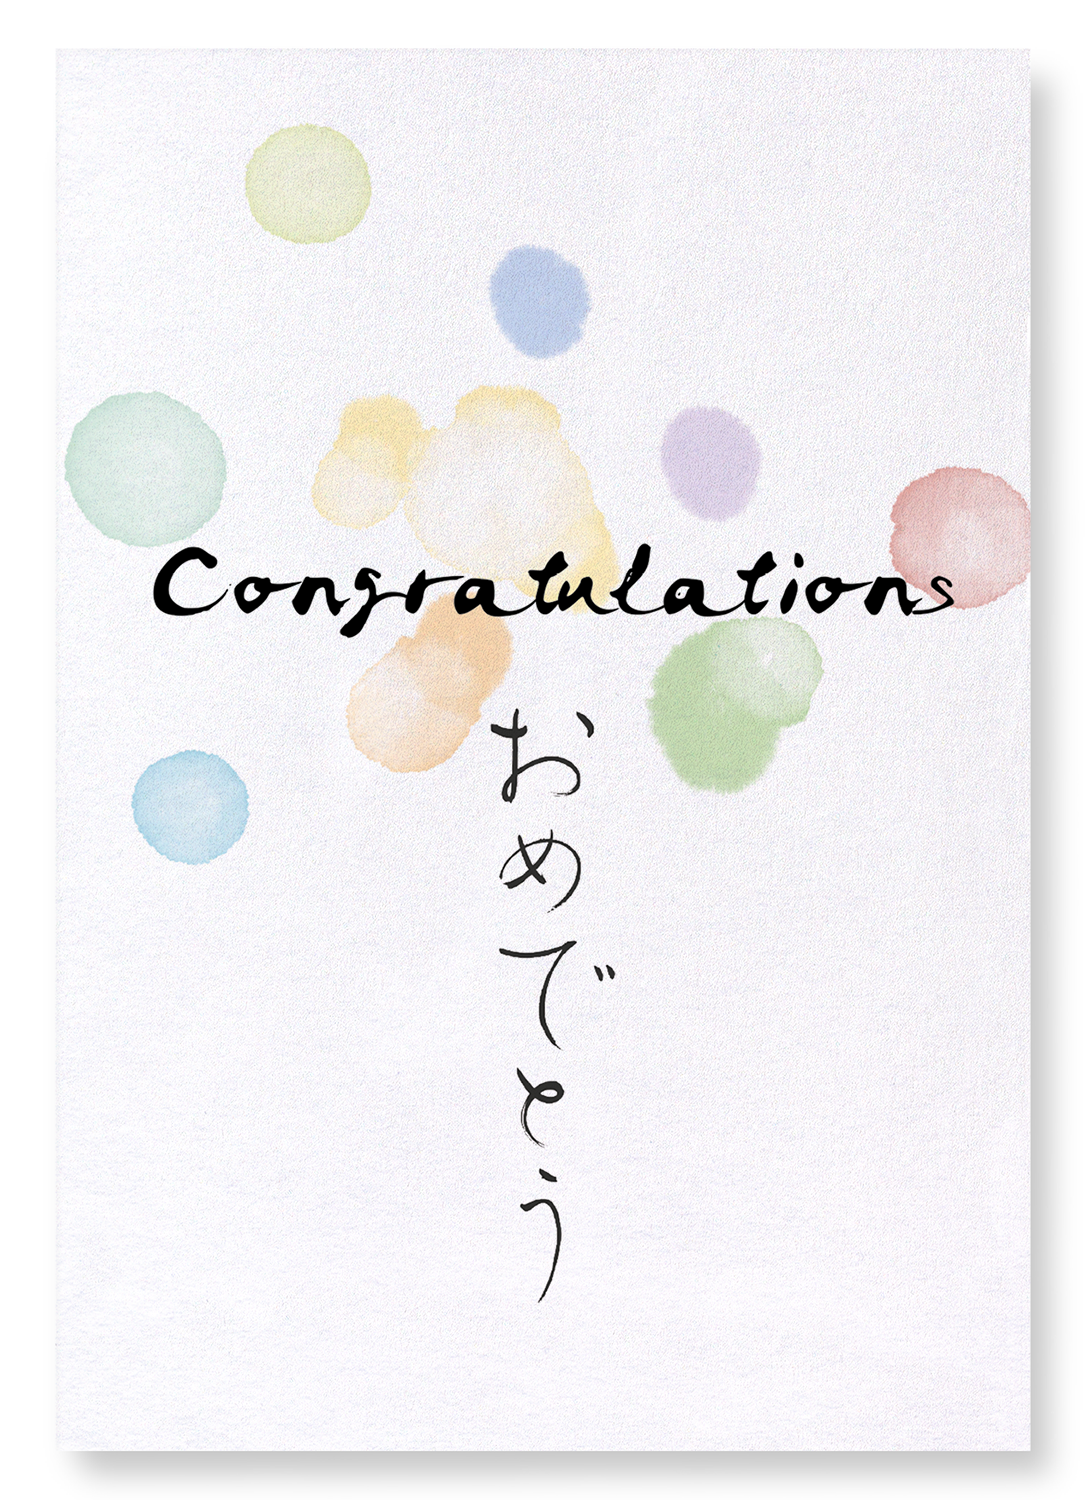 CONGRATULATIONS IN JAPANESE